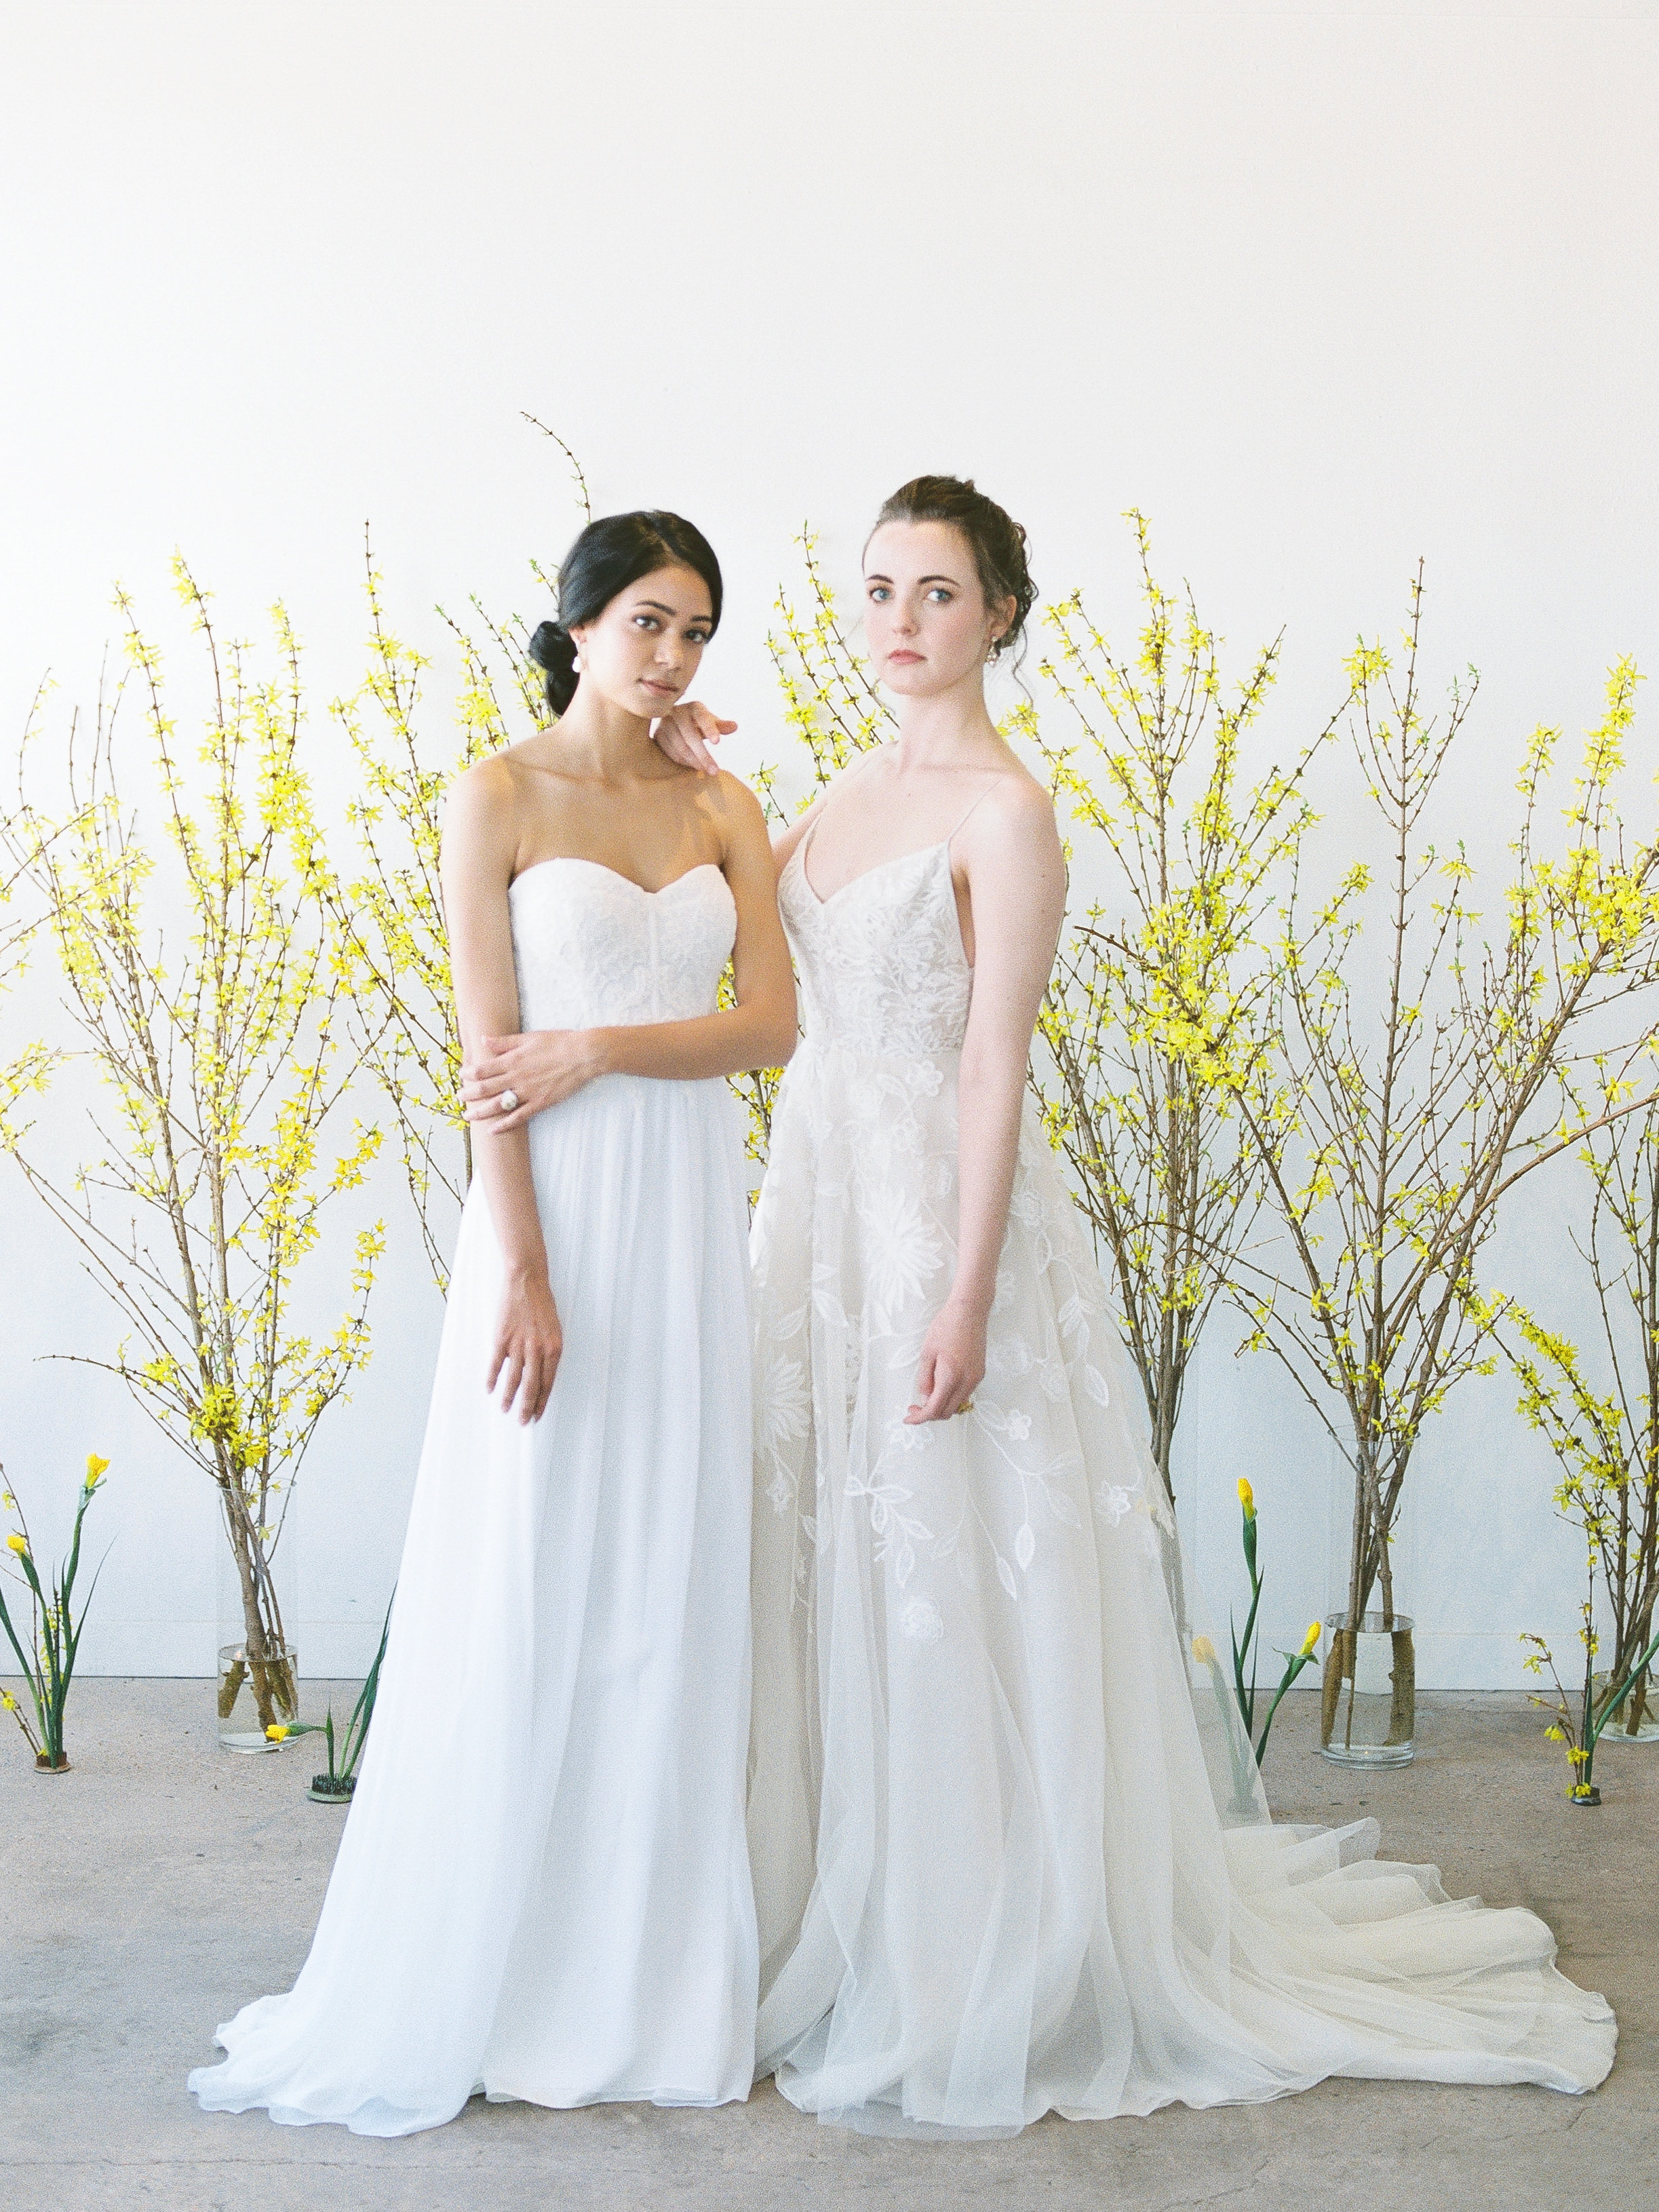  Anne Barge "Lily" and Lela Rose "The Altar" wedding dresses | Spring Bridal Inspiration from Little White Dress Bridal Shop in Denver, Colorado | Decorus Photography 